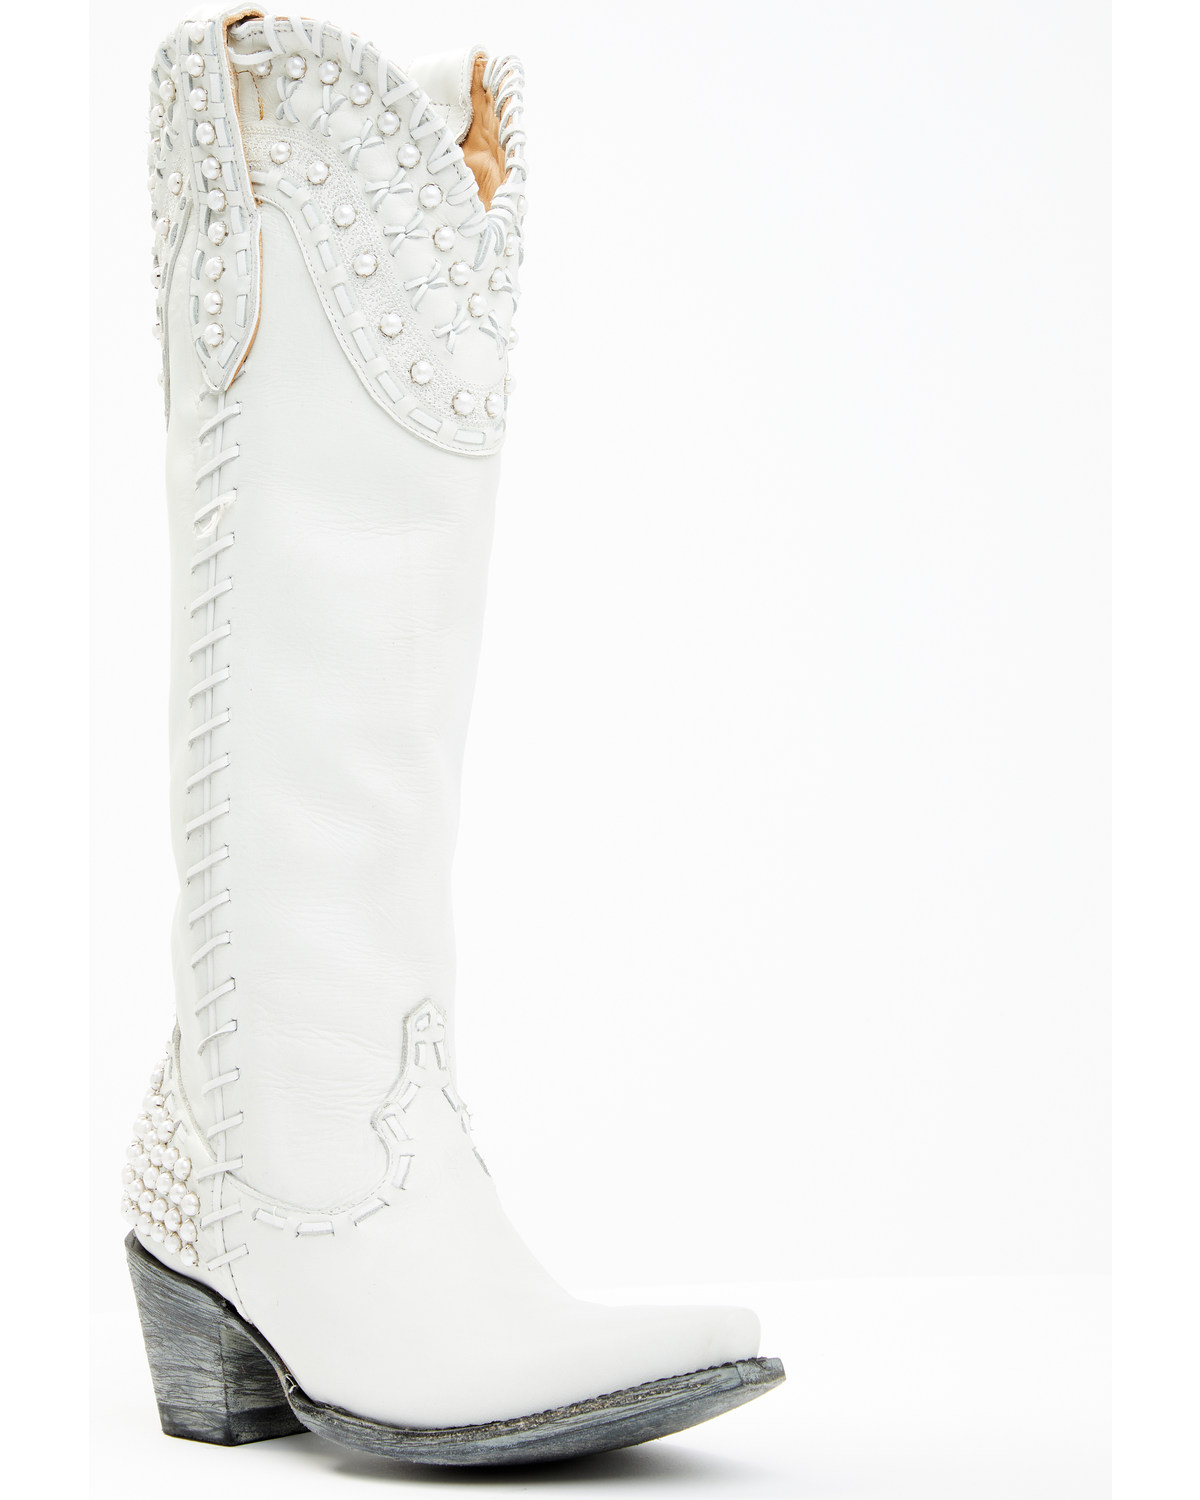 Boot Barn X Double D Women's Exclusive Bridal Pearl Western Boots - Snip Toe